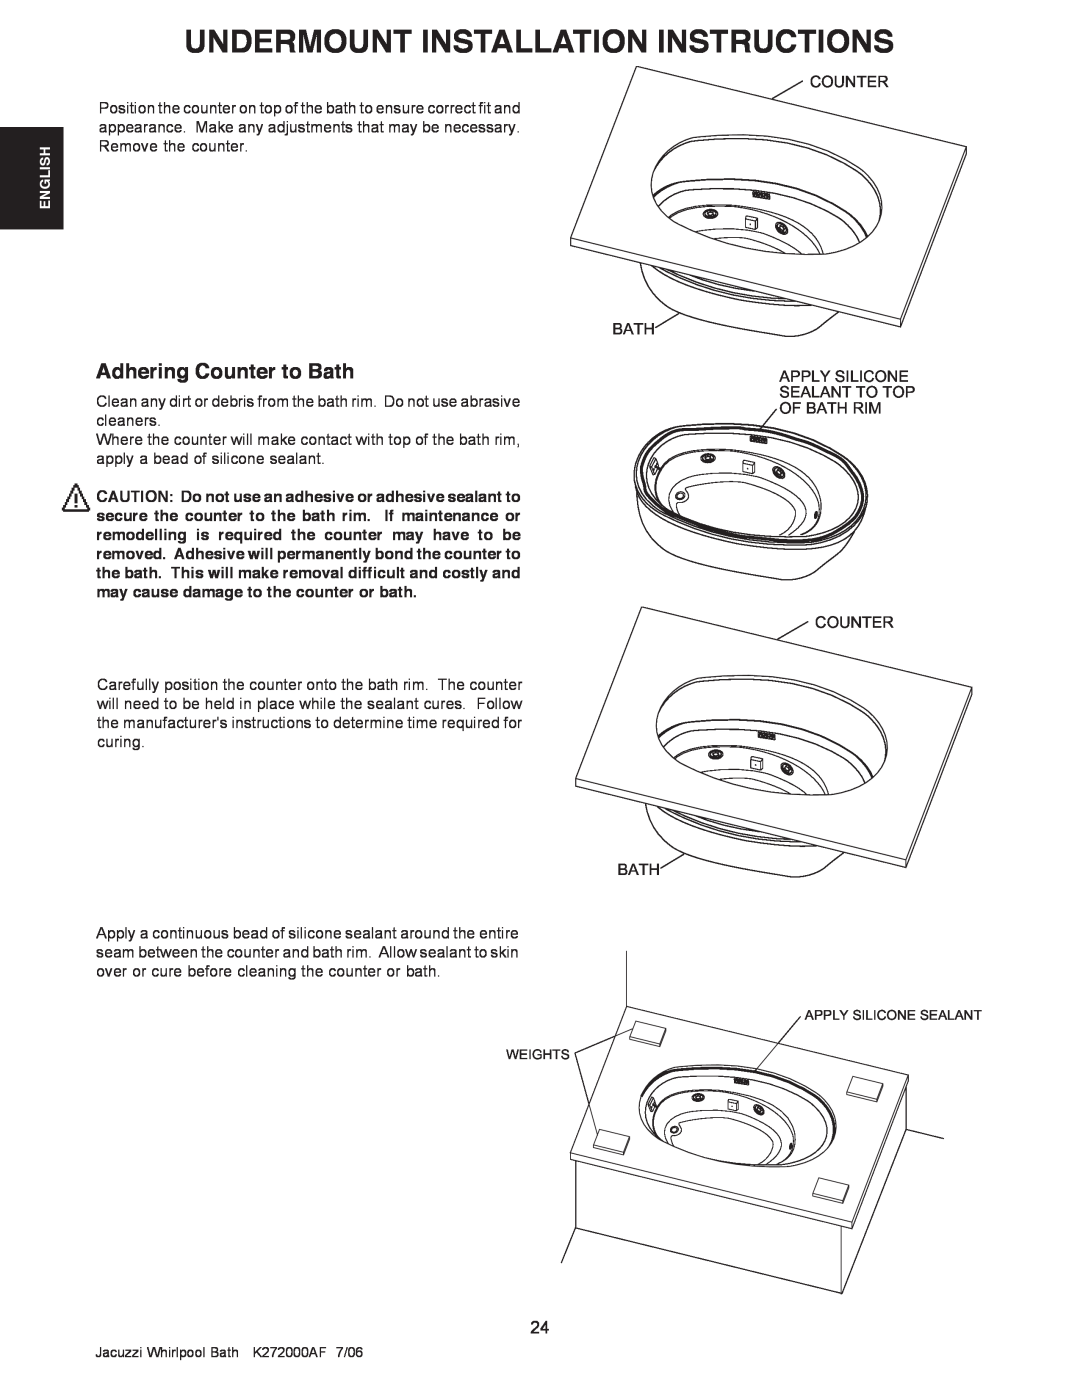 Jacuzzi K272000AF 7/06 Adhering Counter to Bath, Undermount Installation Instructions, Apply Silicone Sealant Weights 